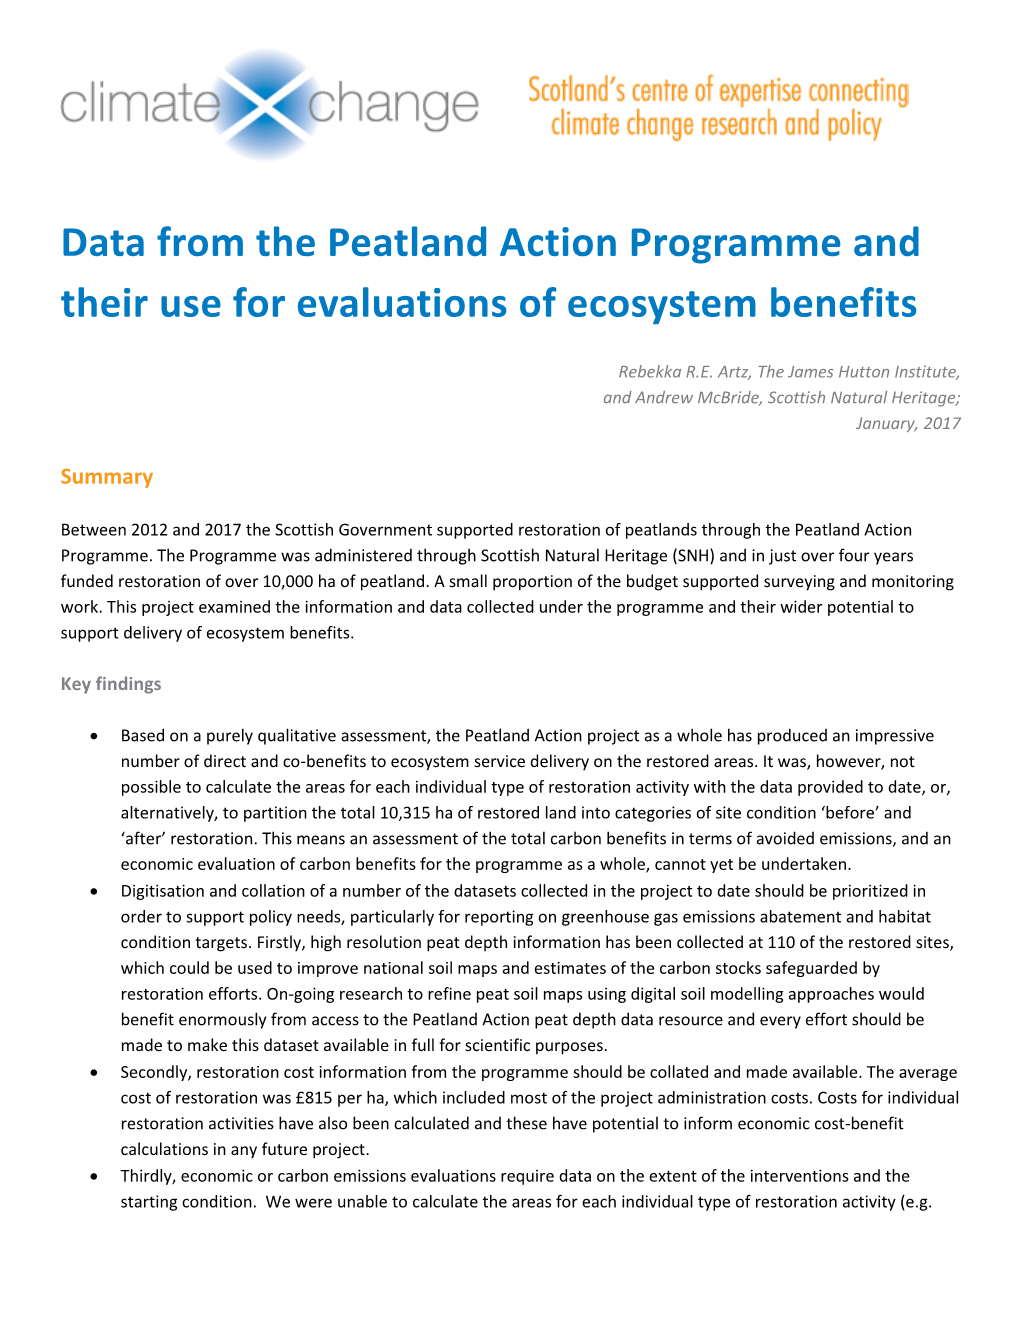 Data from the Peatland Action Programme and Their Use for Evaluations of Ecosystem Benefits